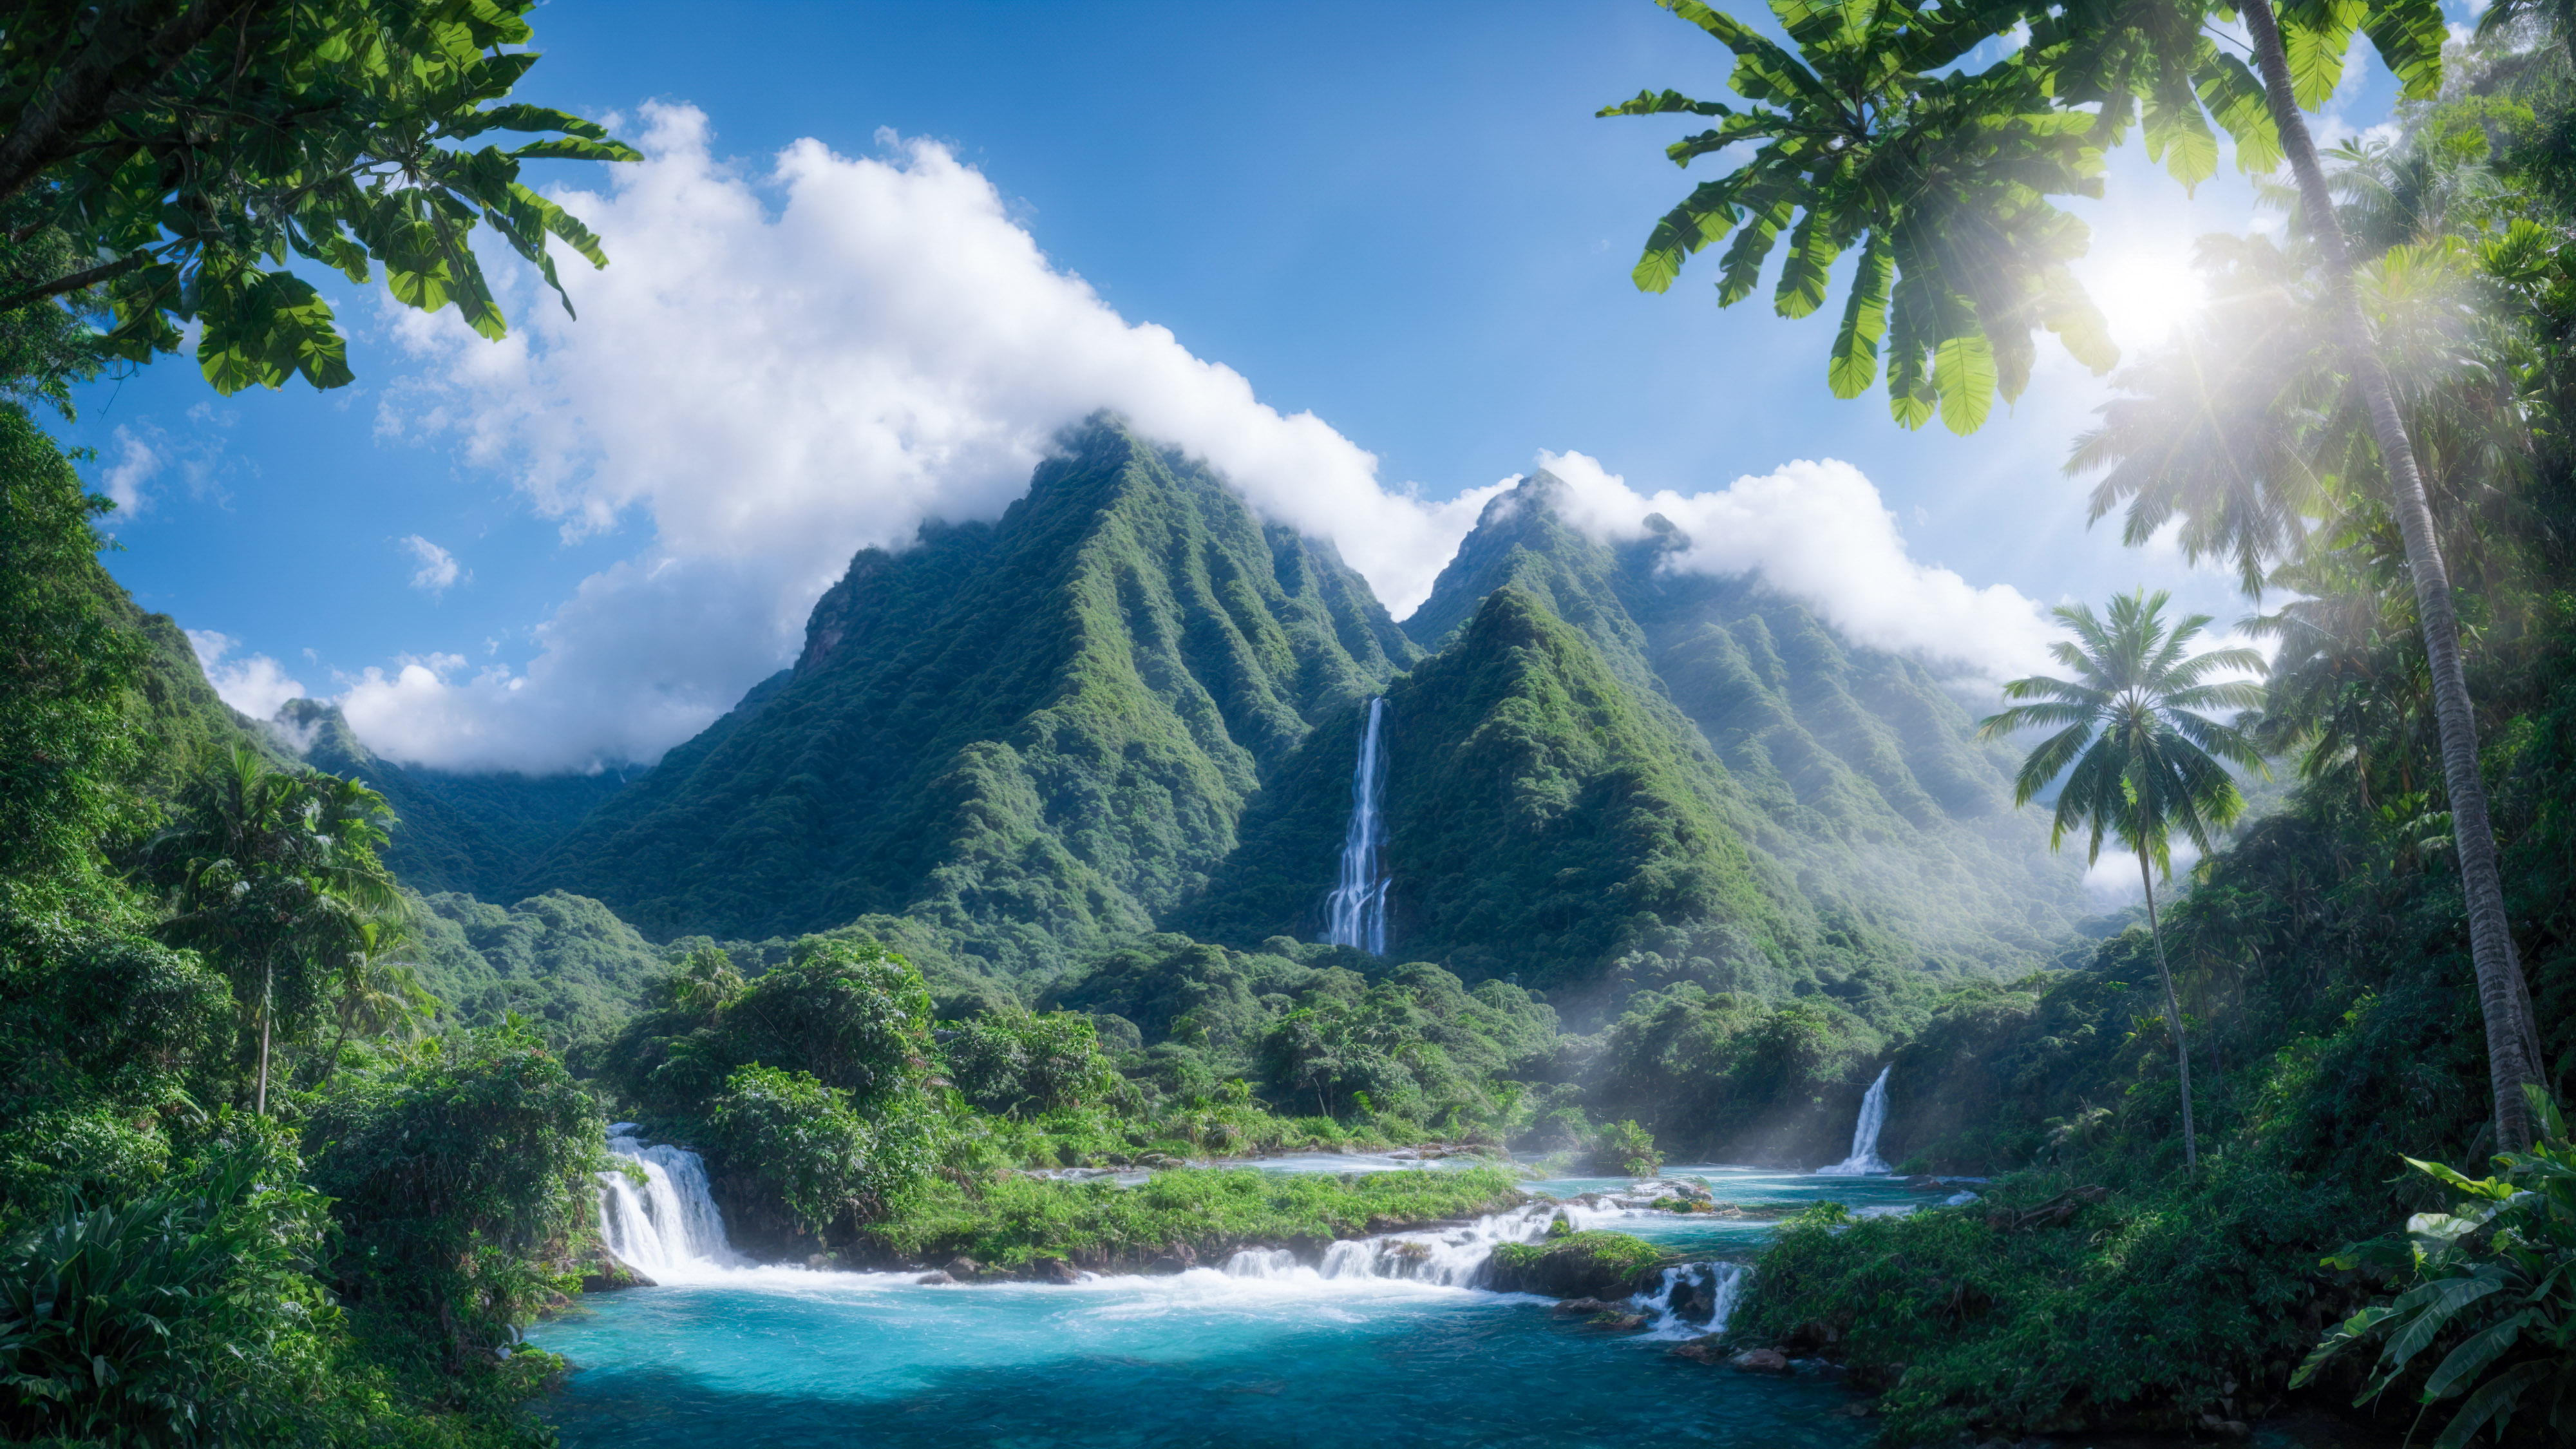 Get a forest wallpaper that showcases a tropical mountain with a lush jungle and a waterfall, complemented by a rainbow and a blue sky.